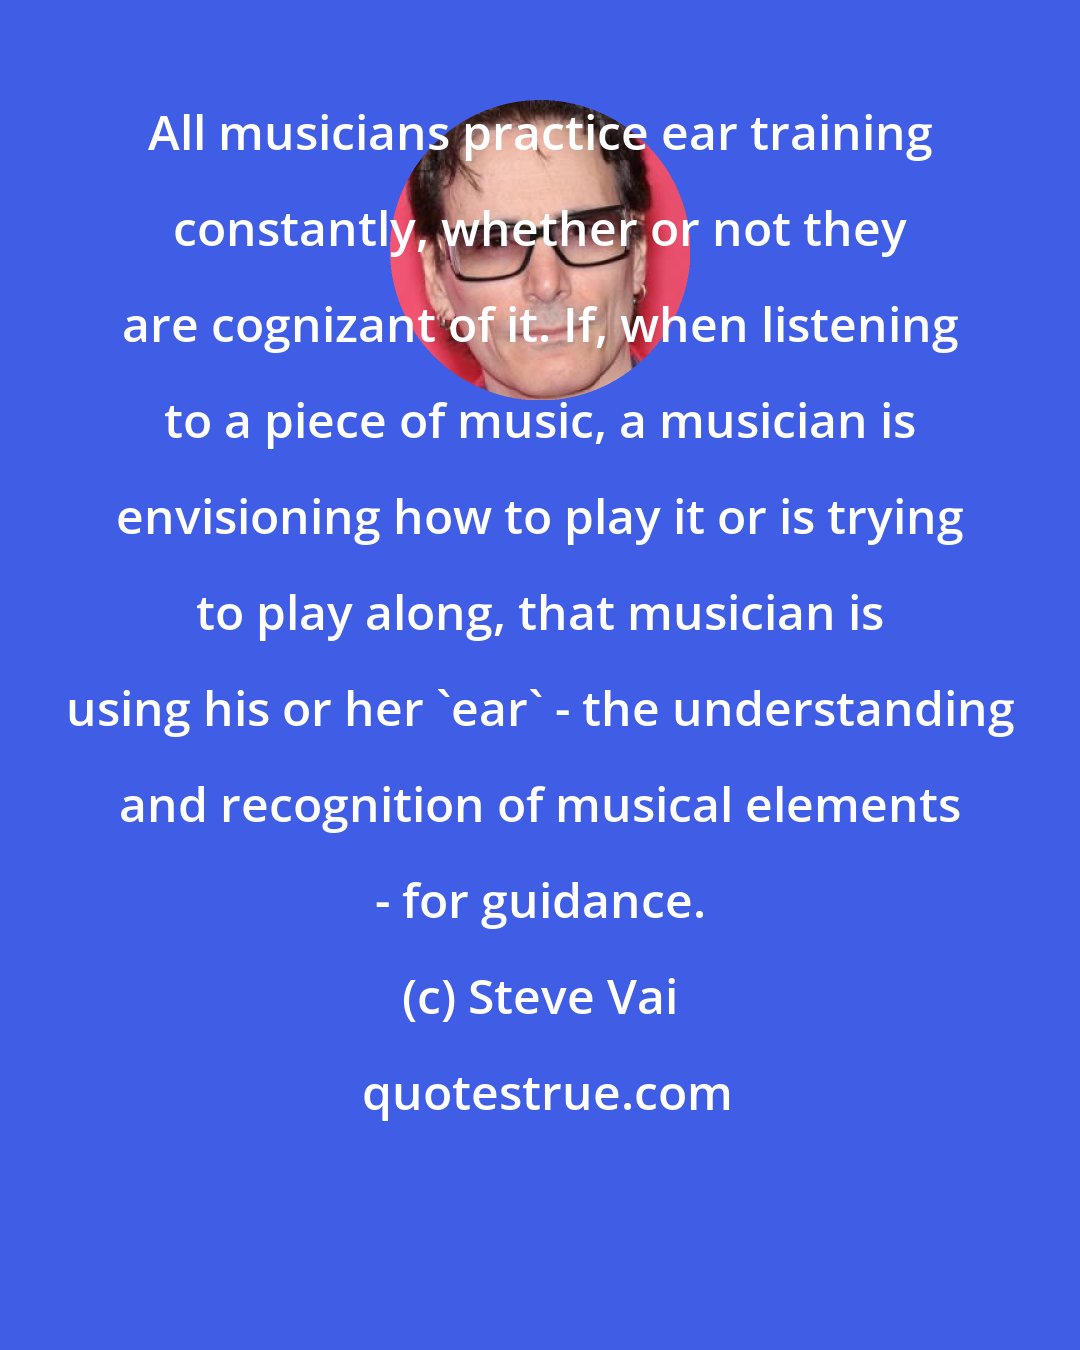 Steve Vai: All musicians practice ear training constantly, whether or not they are cognizant of it. If, when listening to a piece of music, a musician is envisioning how to play it or is trying to play along, that musician is using his or her 'ear' - the understanding and recognition of musical elements - for guidance.